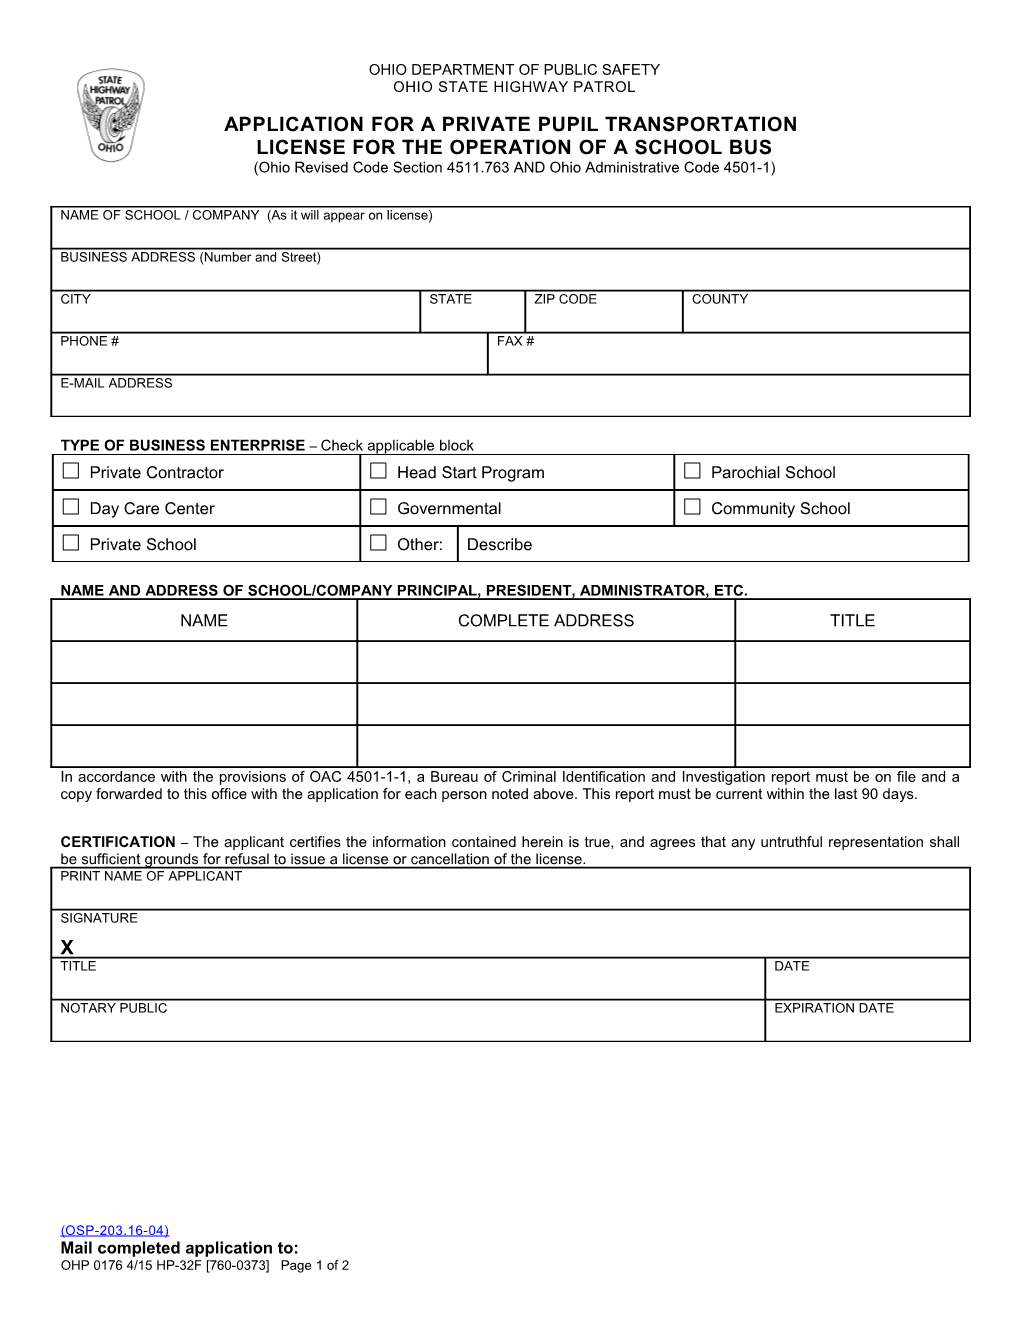 State of Ohio Department of Public Safety Hp 32F Hp-0176-00 Application for License To